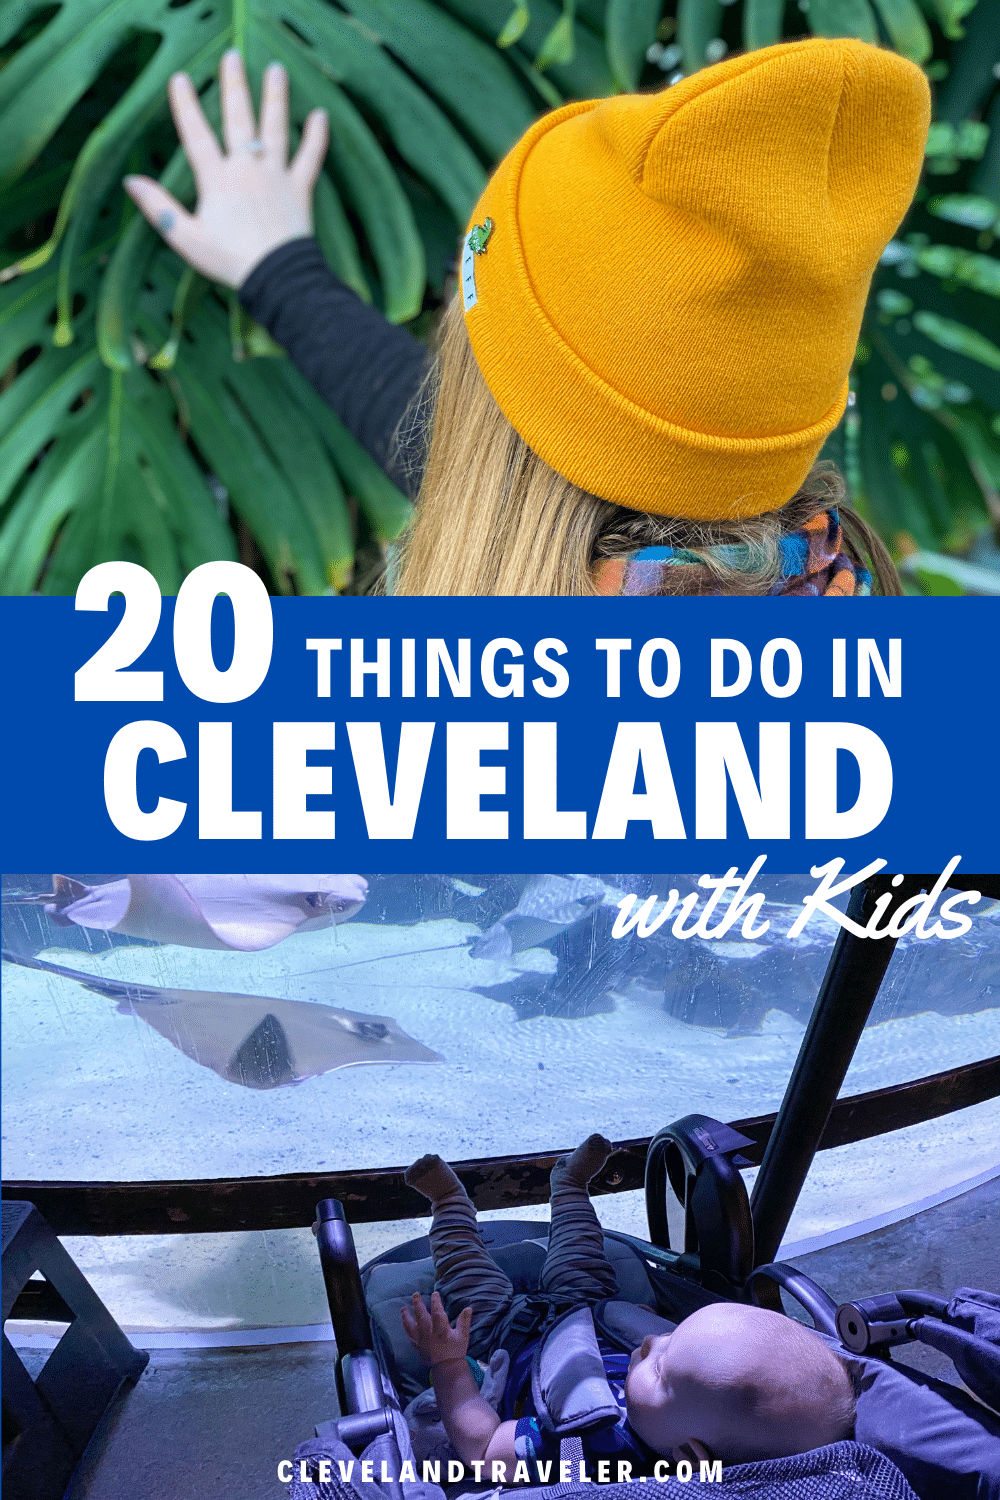 Things to do in Cleveland with kids